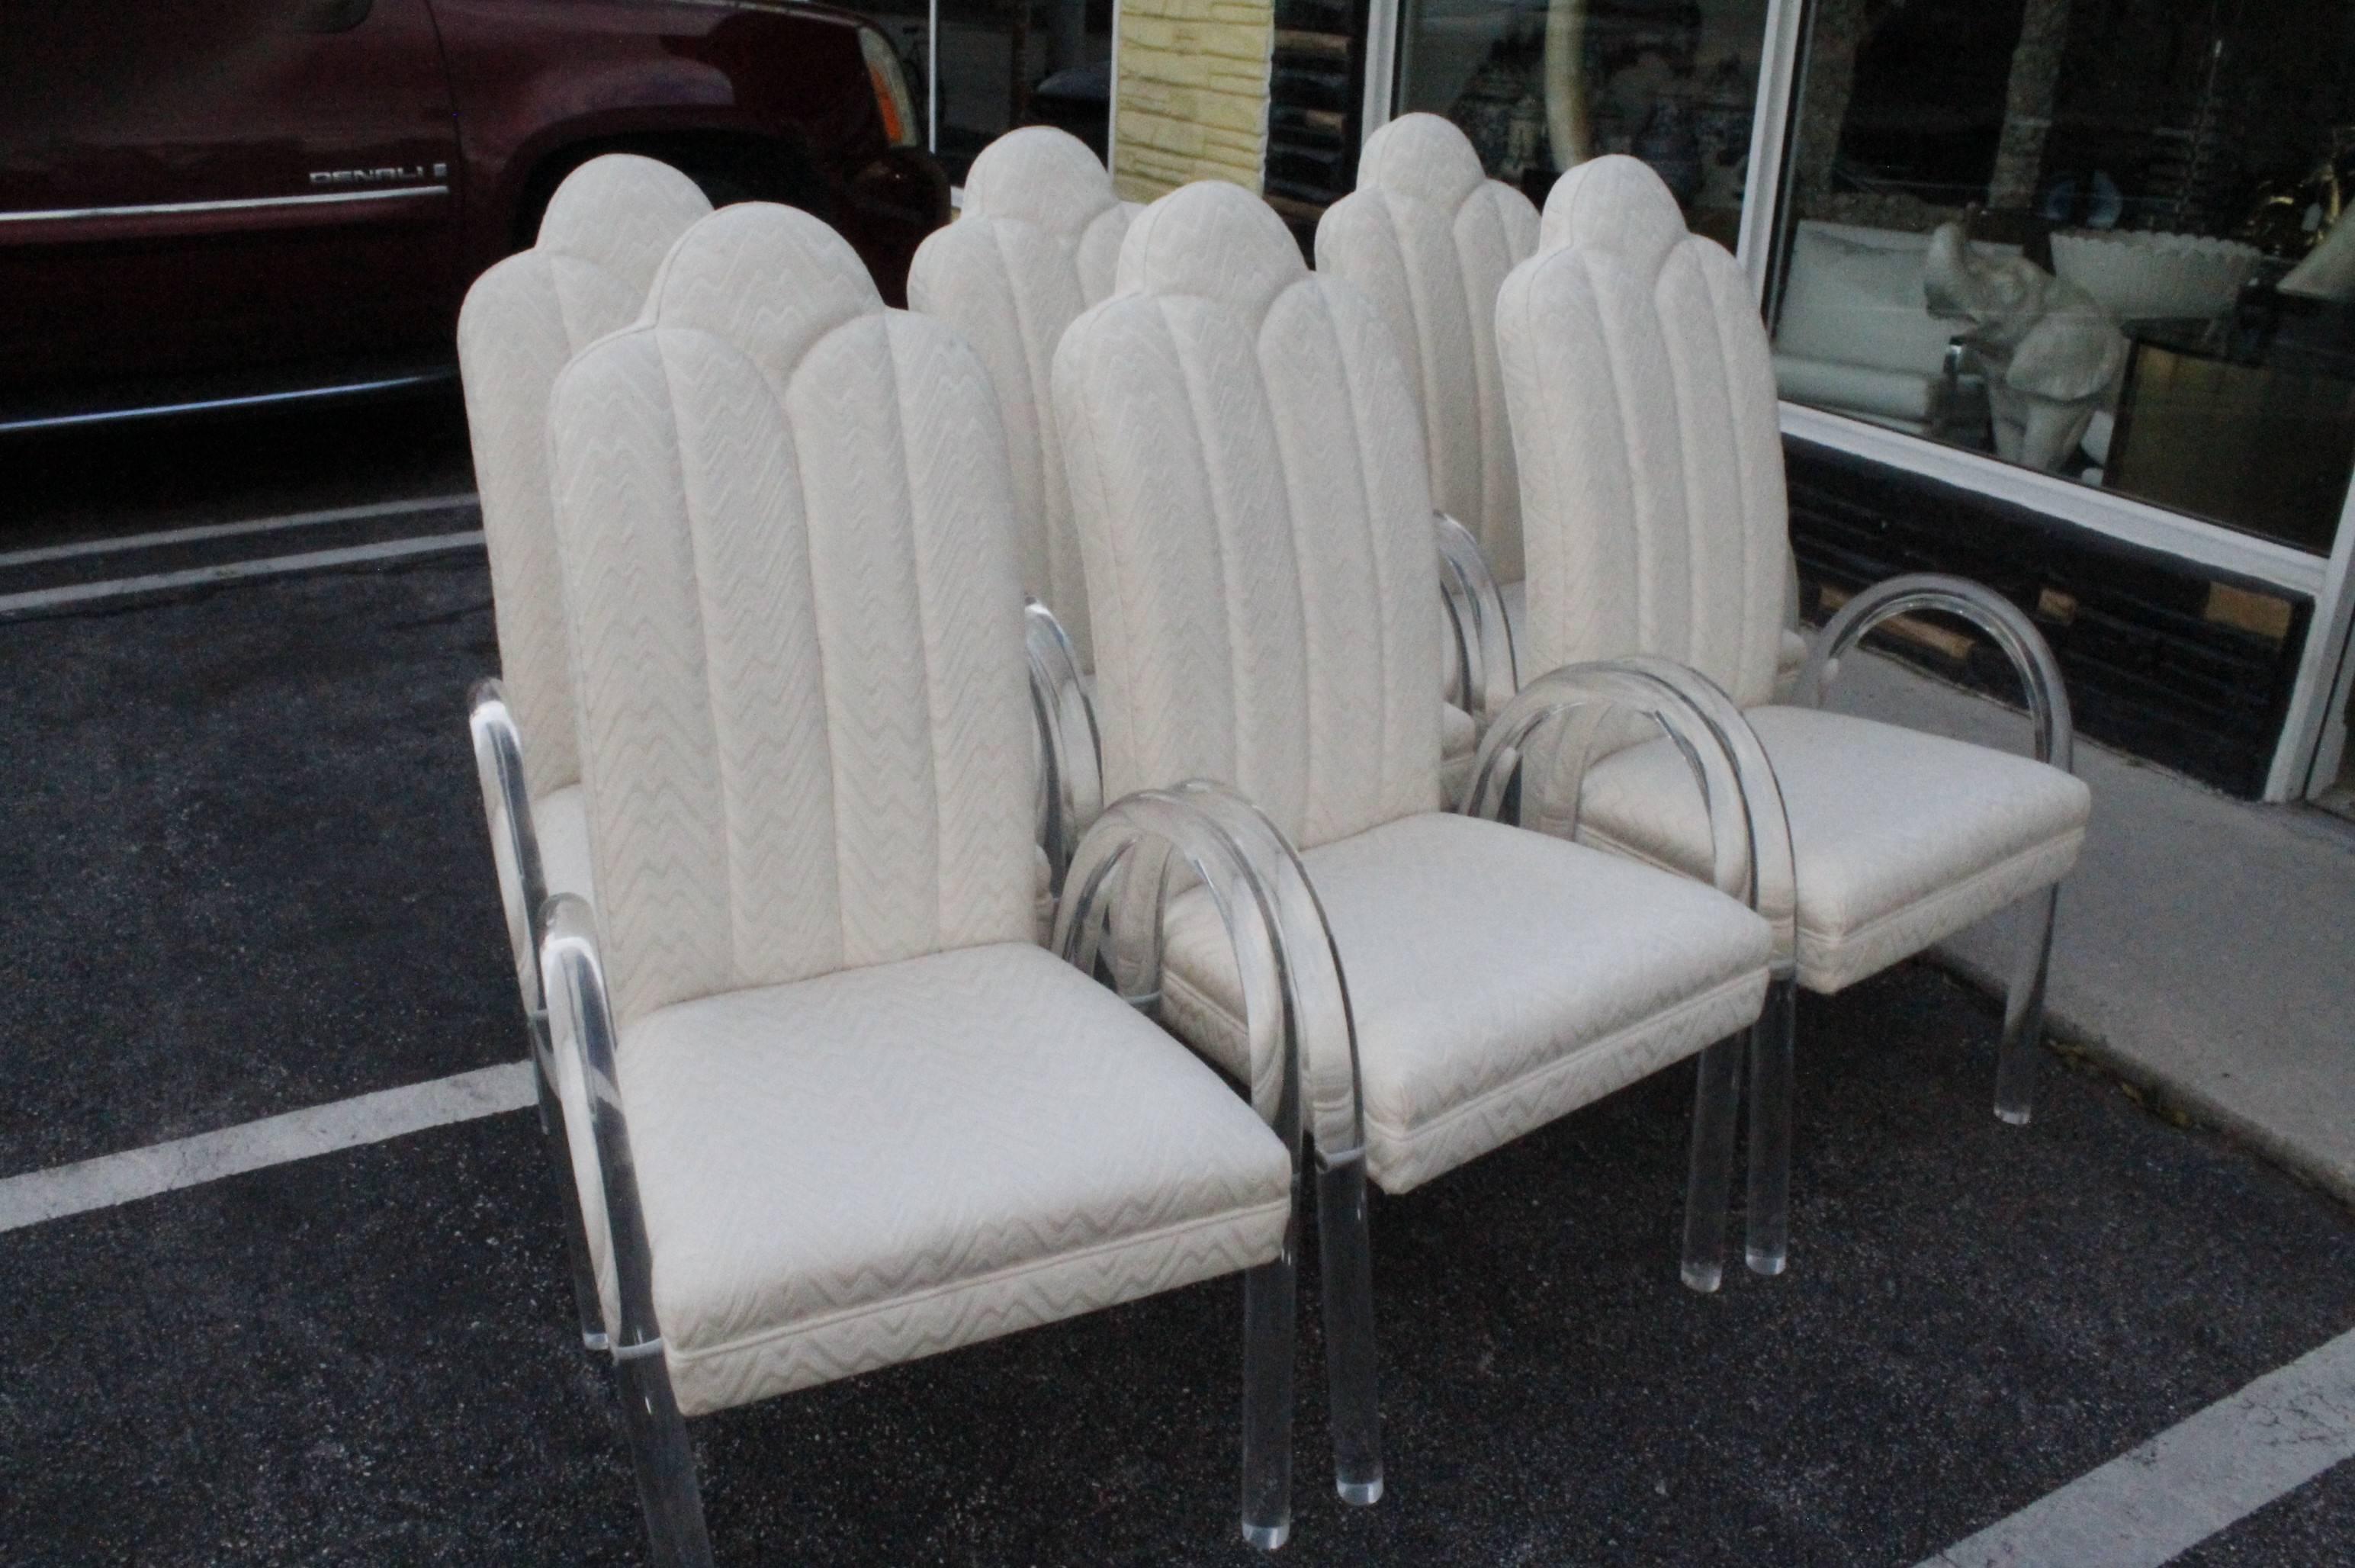 This listing is for a set of 8 Charles Hollis Jones Lucite waterfall arm dining chairs. I have 3 more chairs that match this set if you want any additional to the 8 listed let me know and I can revise the listing to accommodate the number you need.